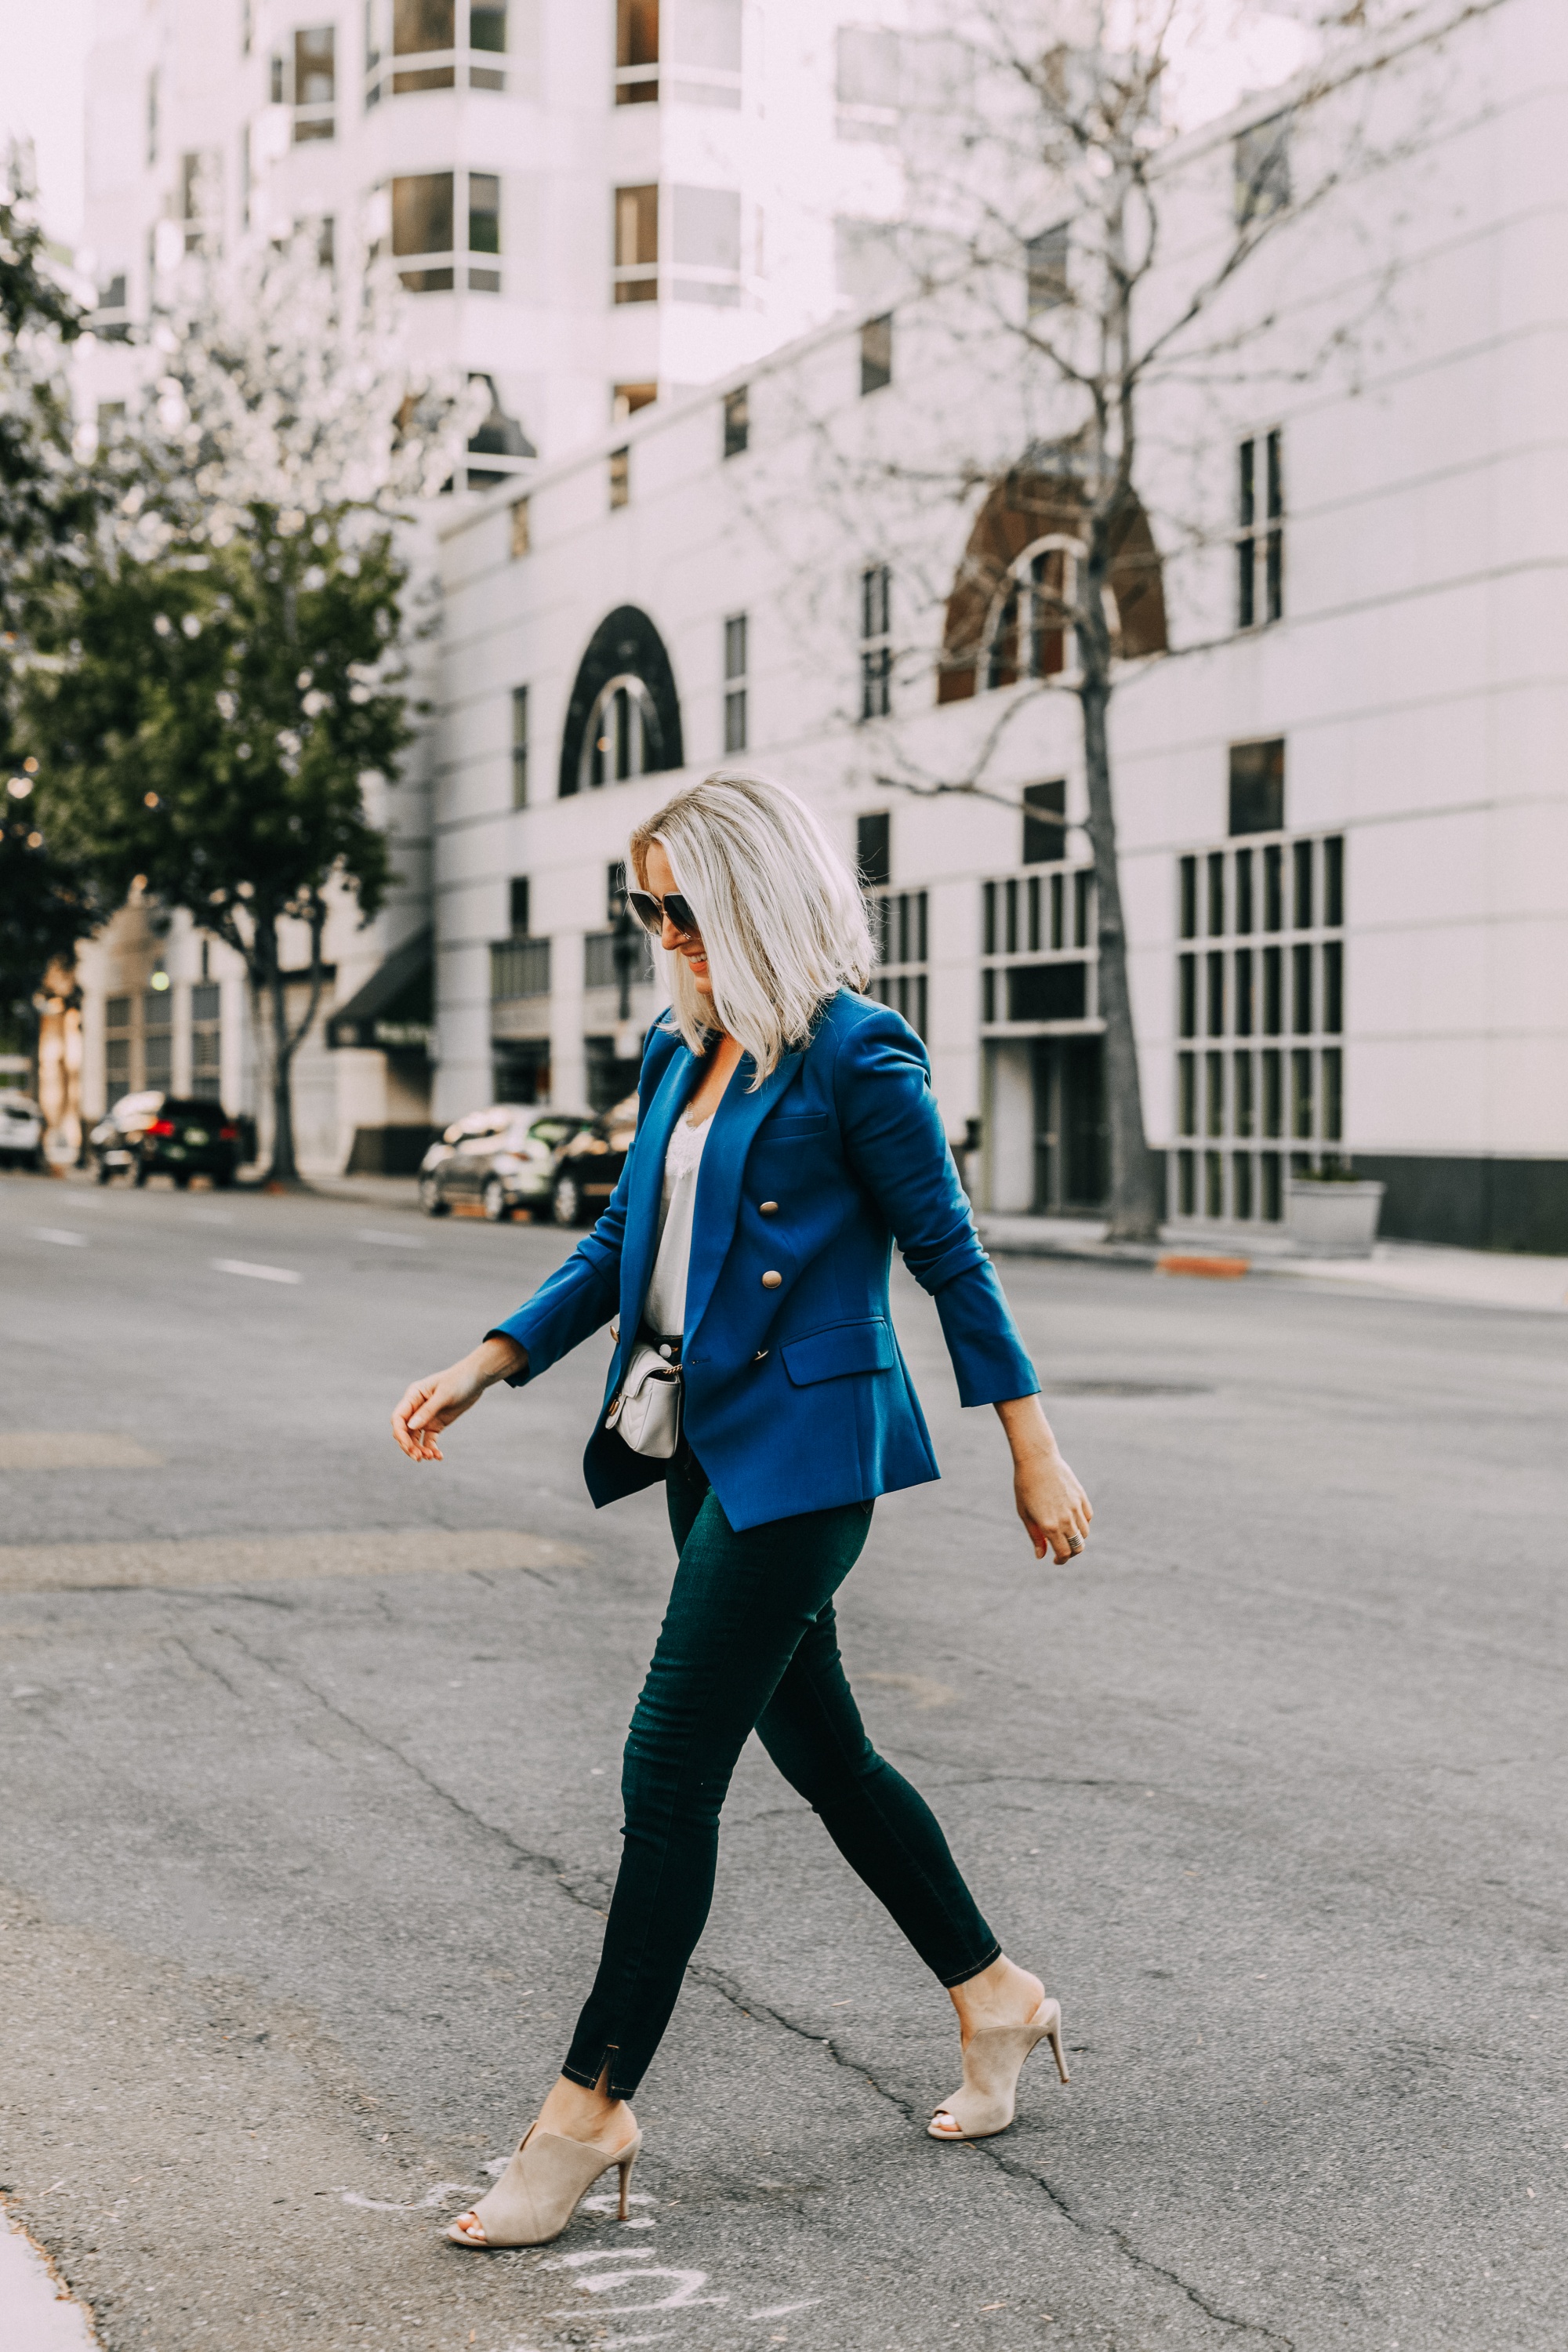 Blue Blazer, Fashion blogger Erin Busbee of BusbeeStyle.com wearing a bold blue blazer by L'AGENCE with a white cami, dark wash skinny jeans by L'AGENCE, neutral mules by Vince Camuto, and a white mini Gucci bag in San Diego, CA